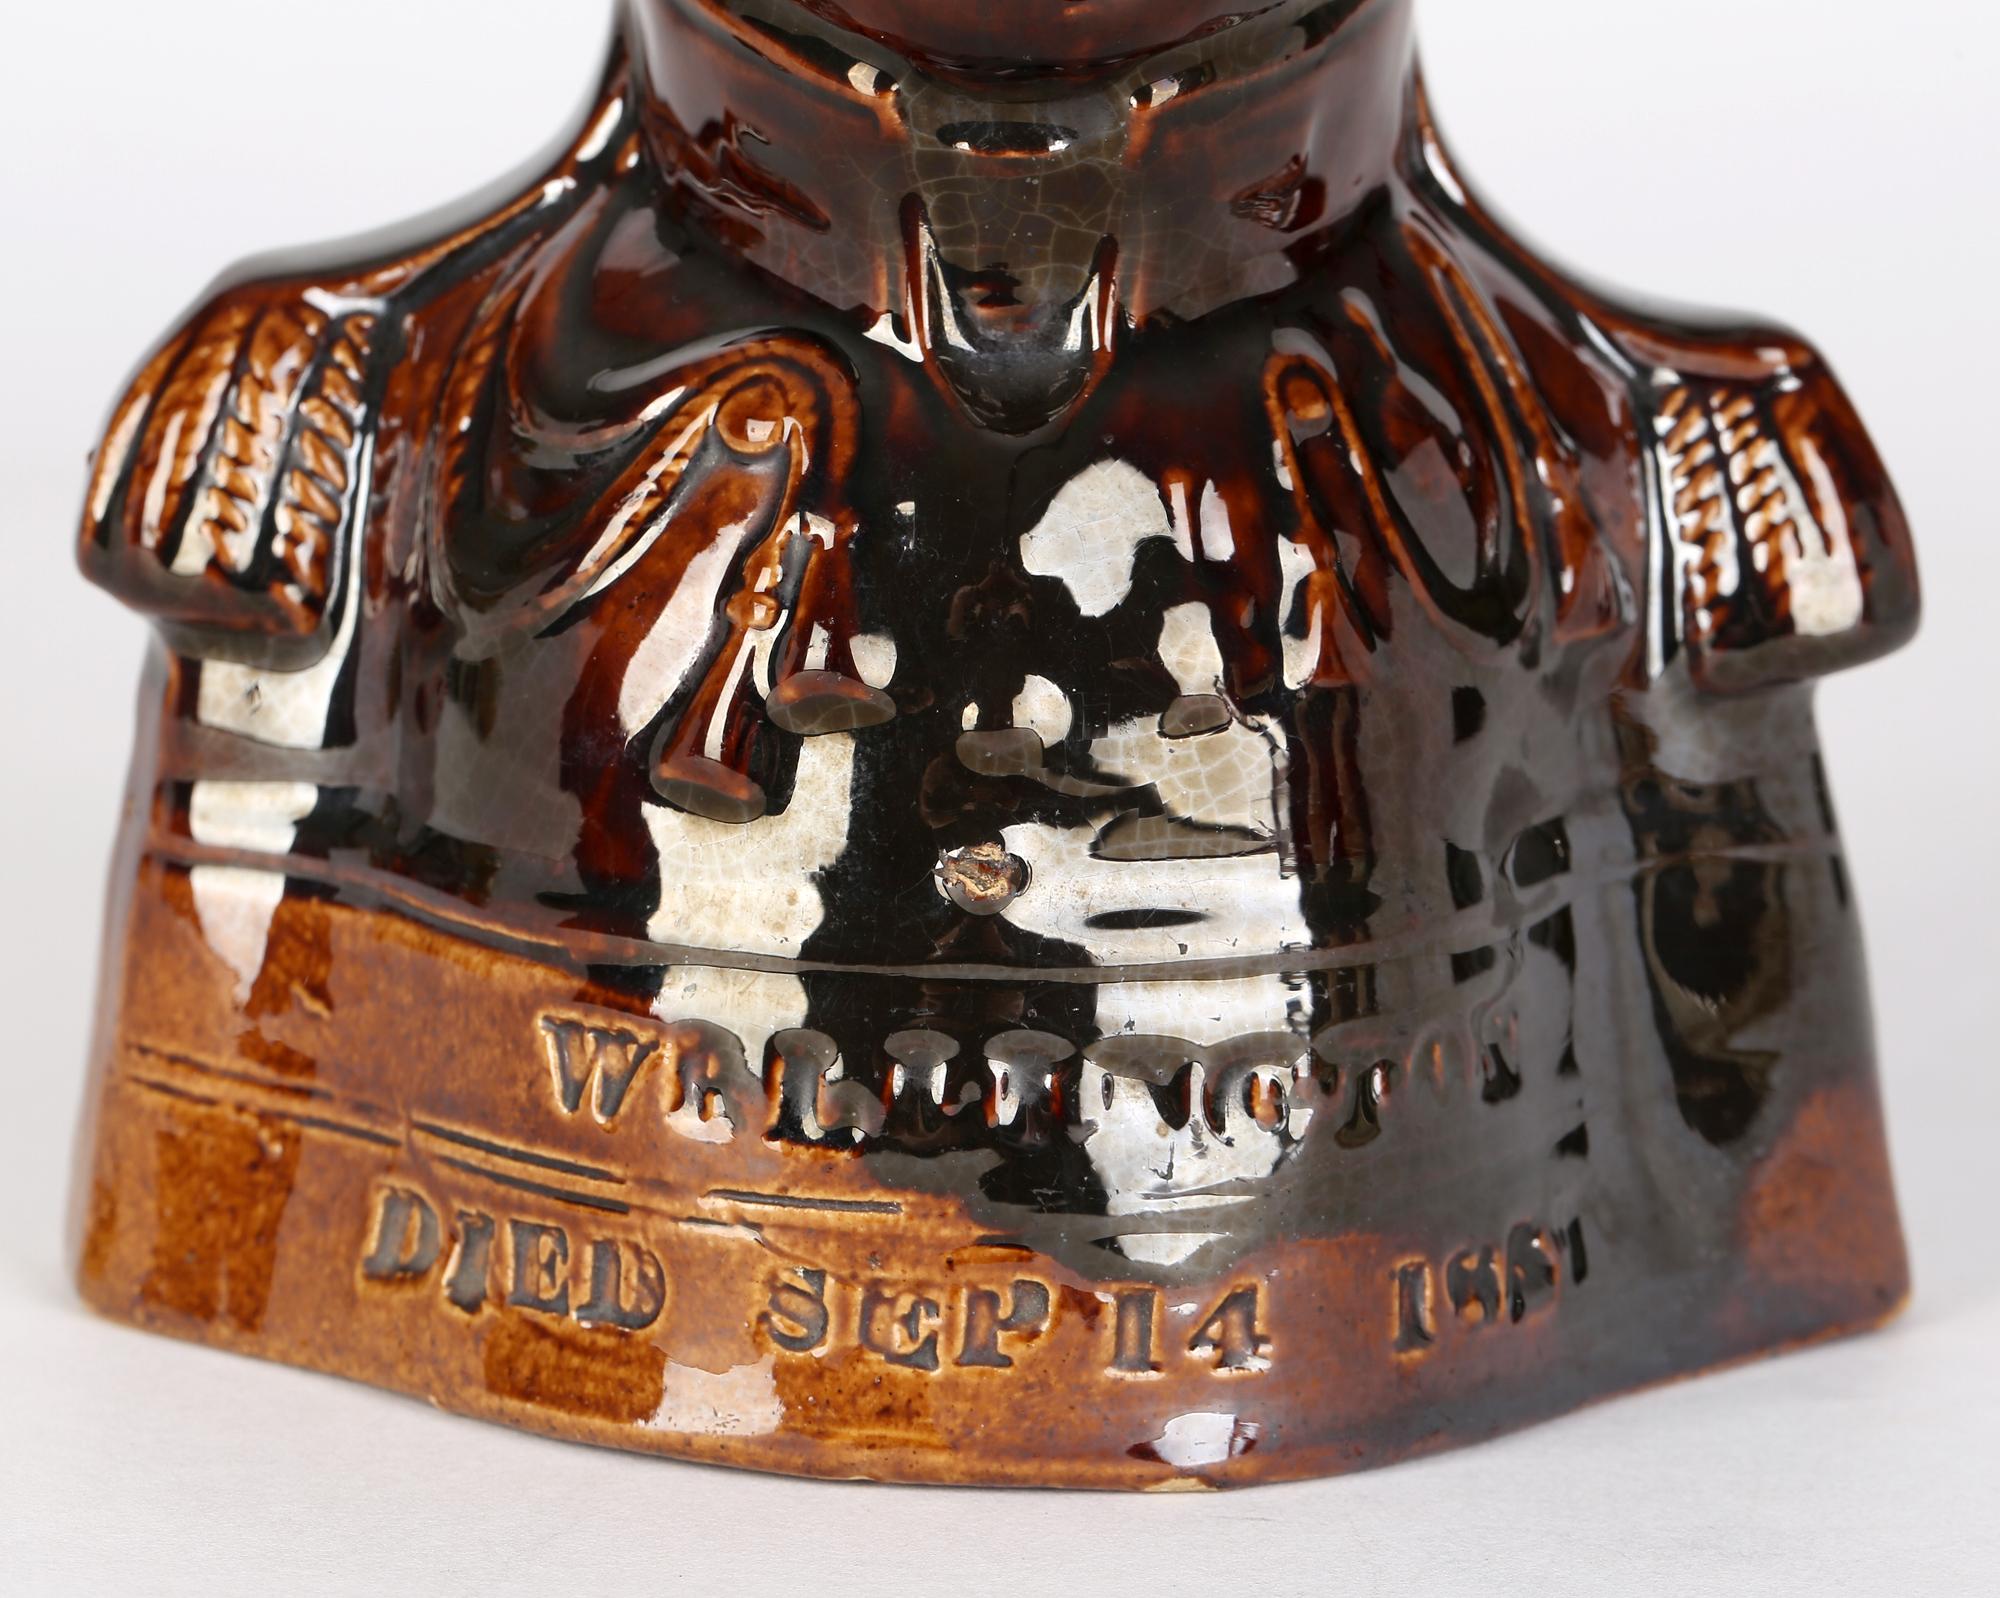 A fine English Staffordshire treacle glazed pottery jug commemorating the death of Wellington on September 14, 1852. The jug is modelled as a bust of Wellington in military uniform with his tricorn hat forming the pouring spout. The bust sits on a